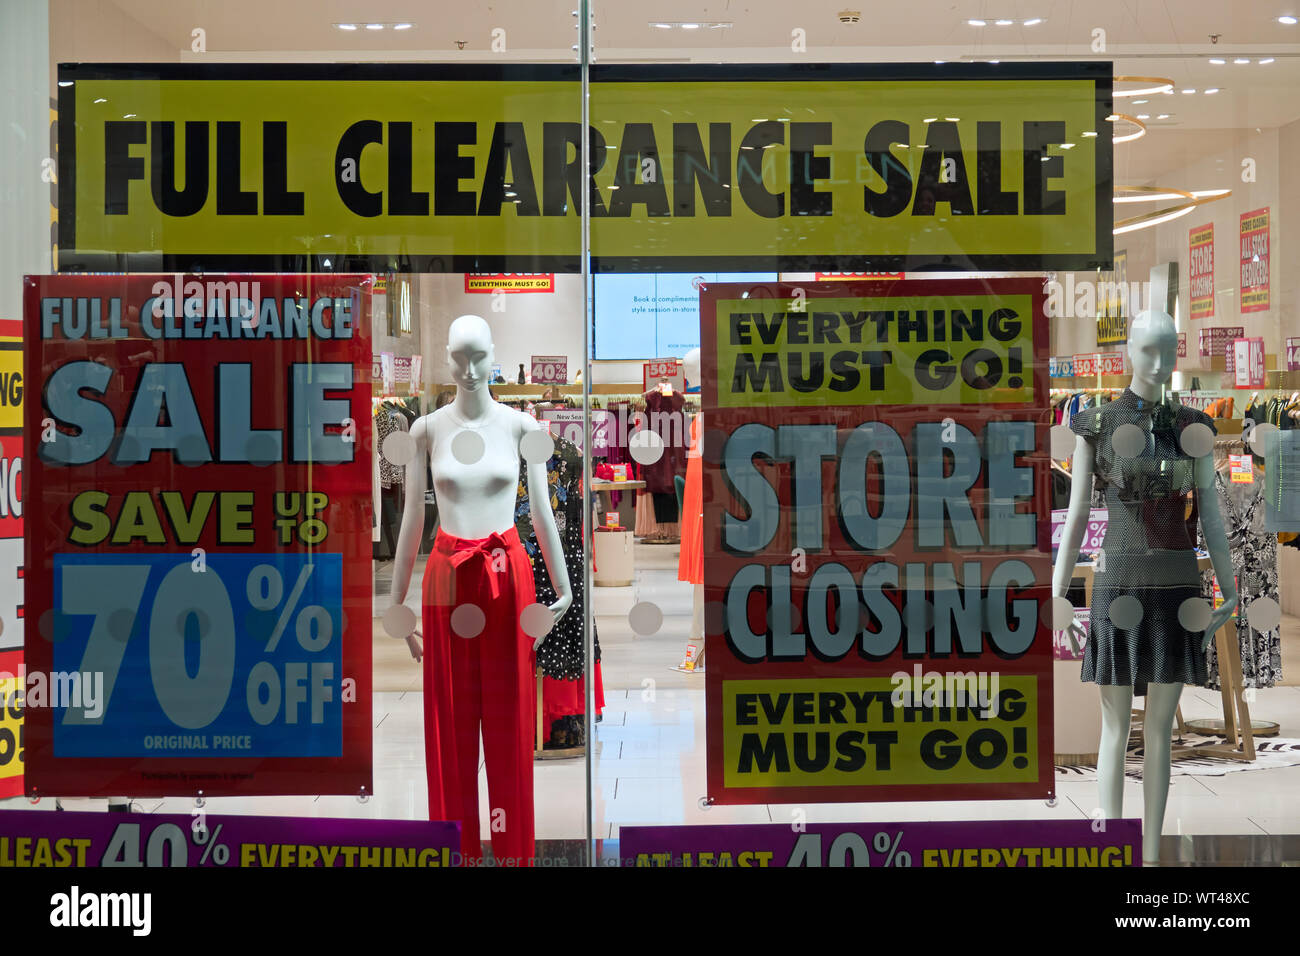 https://c8.alamy.com/comp/WT48XC/store-closing-and-everything-must-go-sale-signs-in-the-window-of-british-womens-clothing-retailer-karen-millen-in-liverpool-one-shopping-centre-WT48XC.jpg